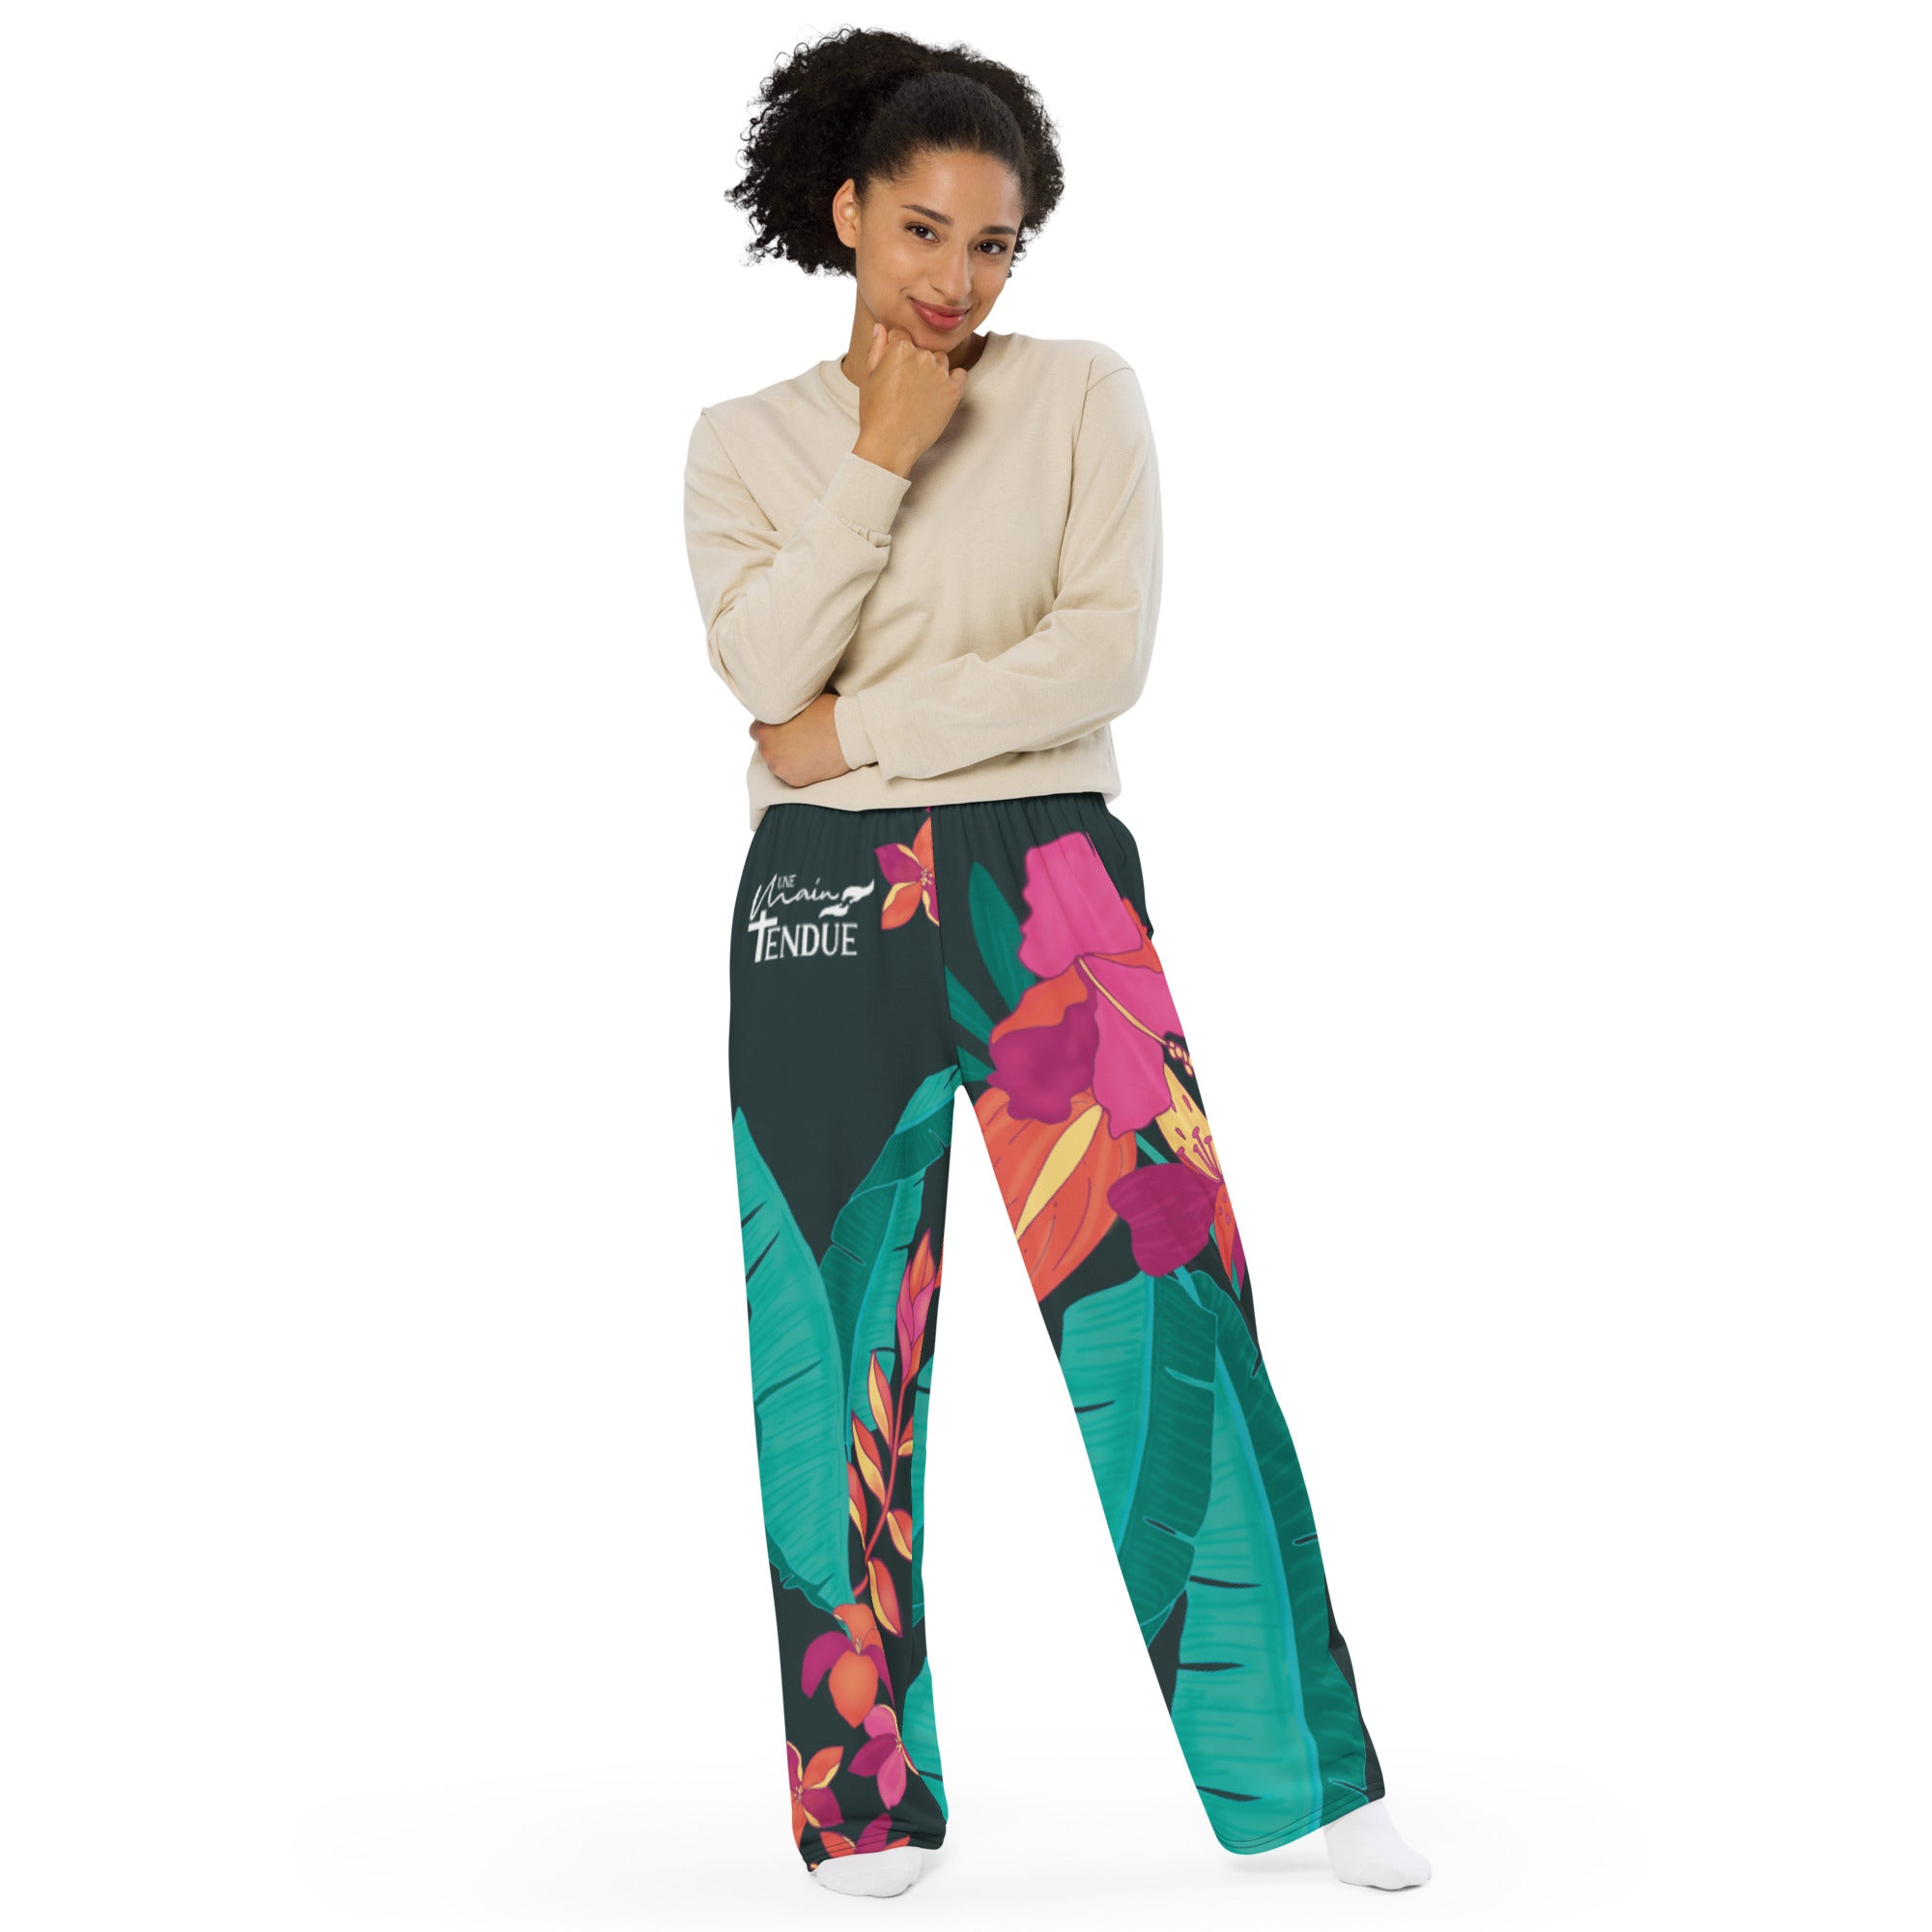 Wide unisex all-over pants